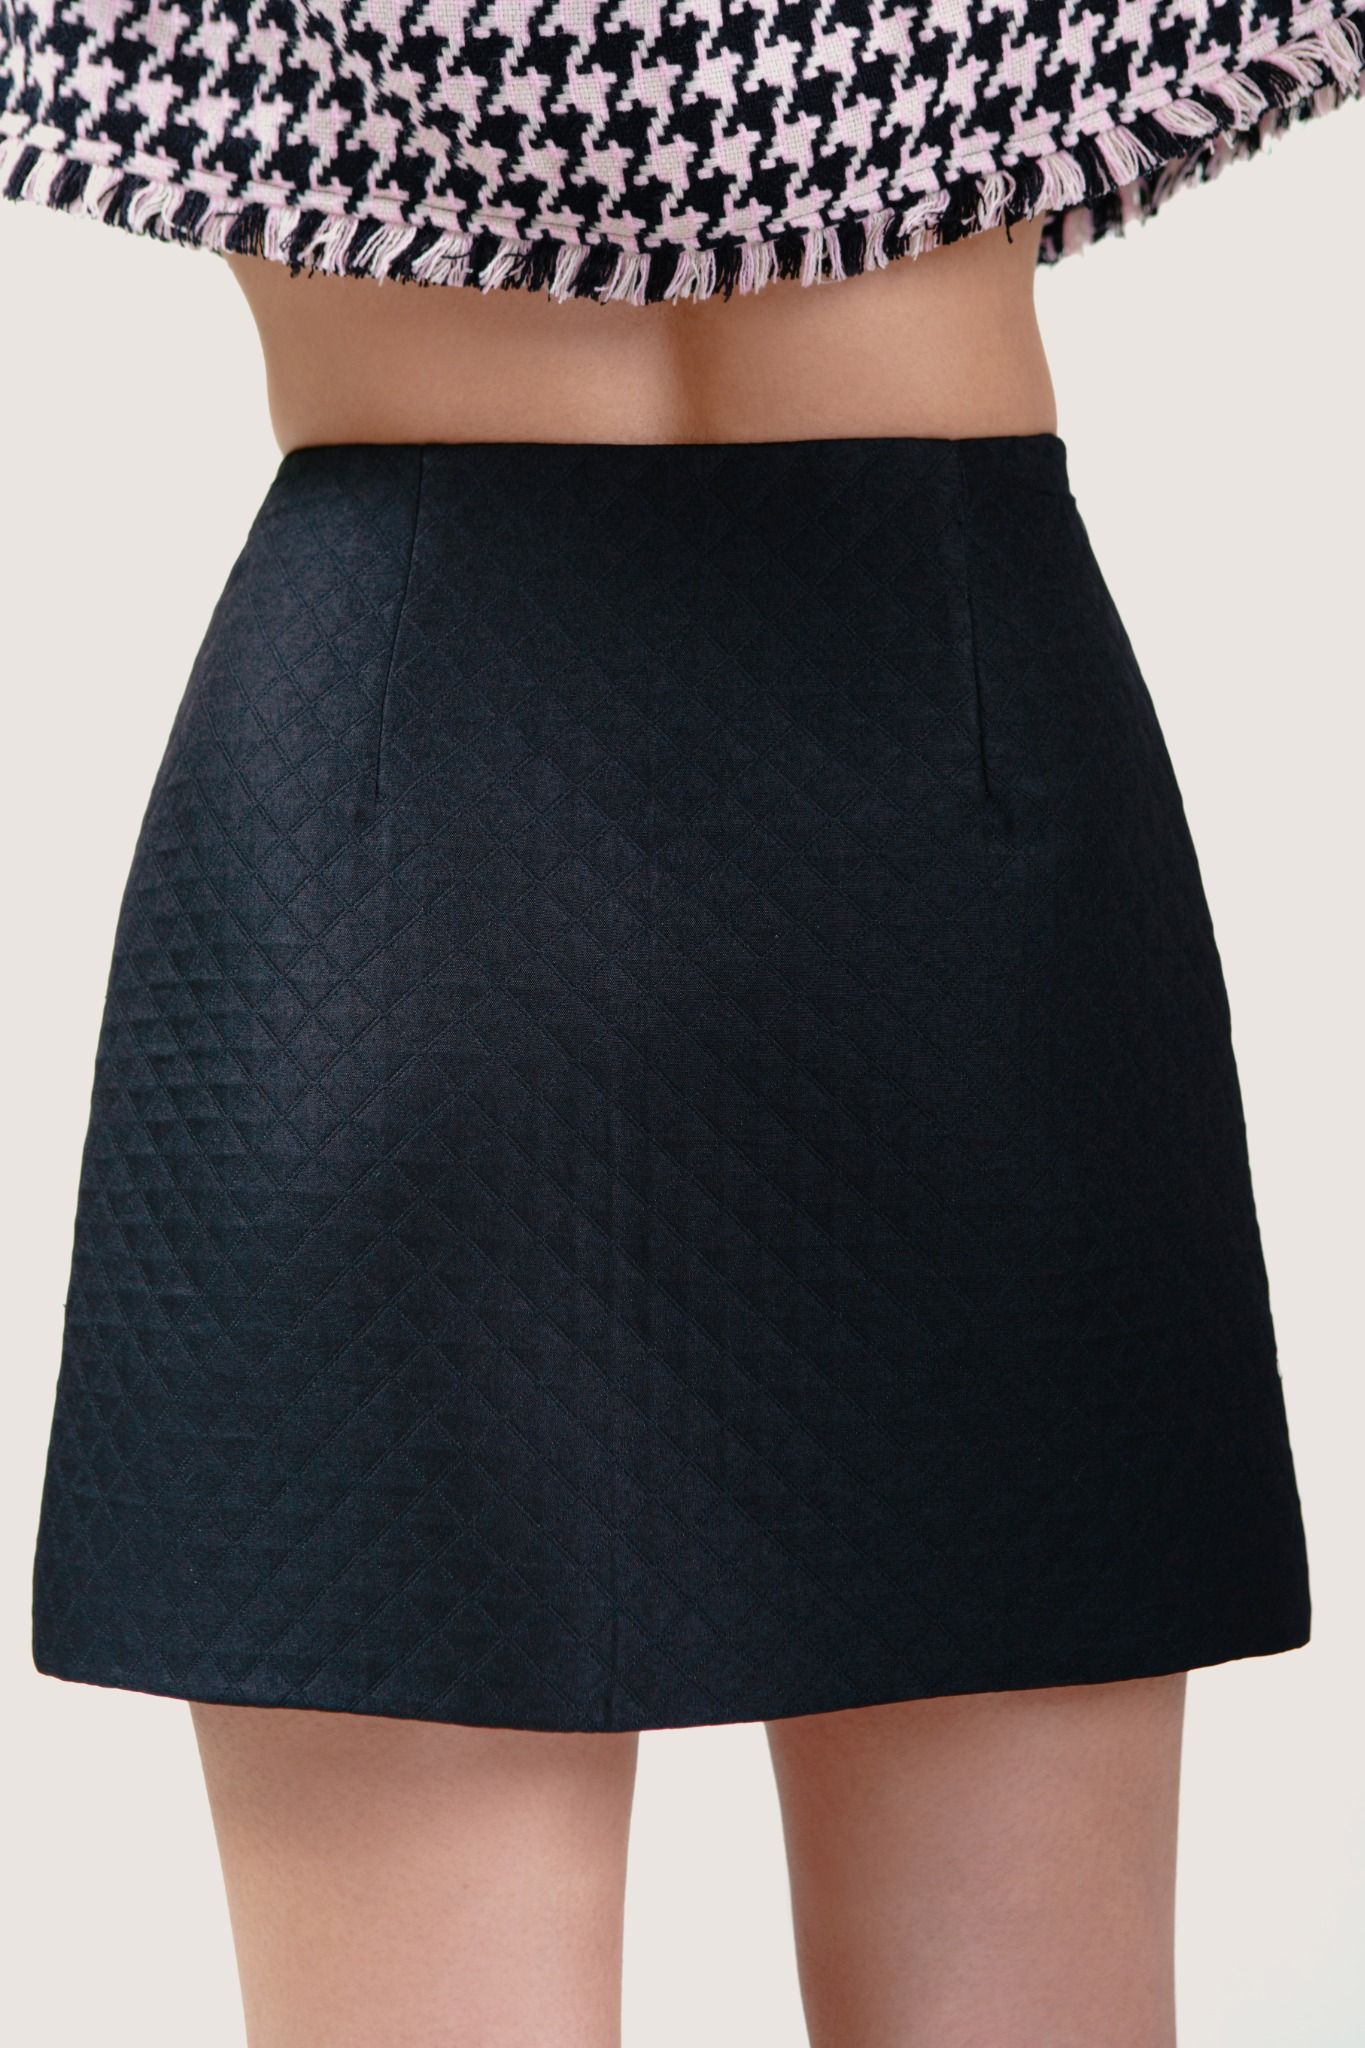  Black Quilted A-Line Mini Skirt 